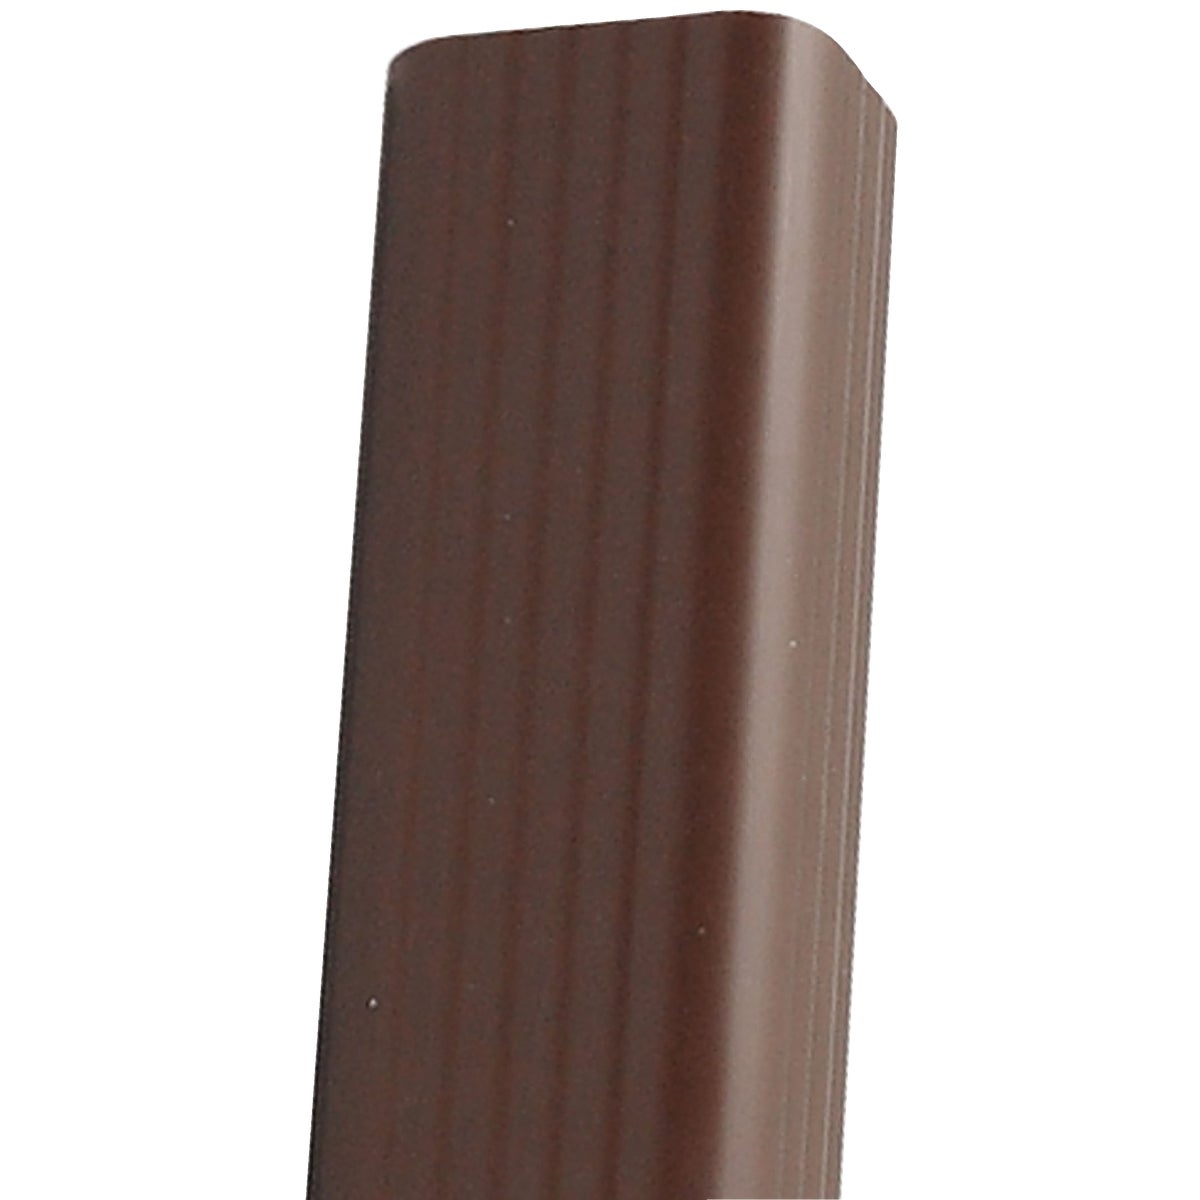 Amerimax 2 In. x 3 In. x 10 Ft. Traditional K-Style Brown Vinyl Downspout